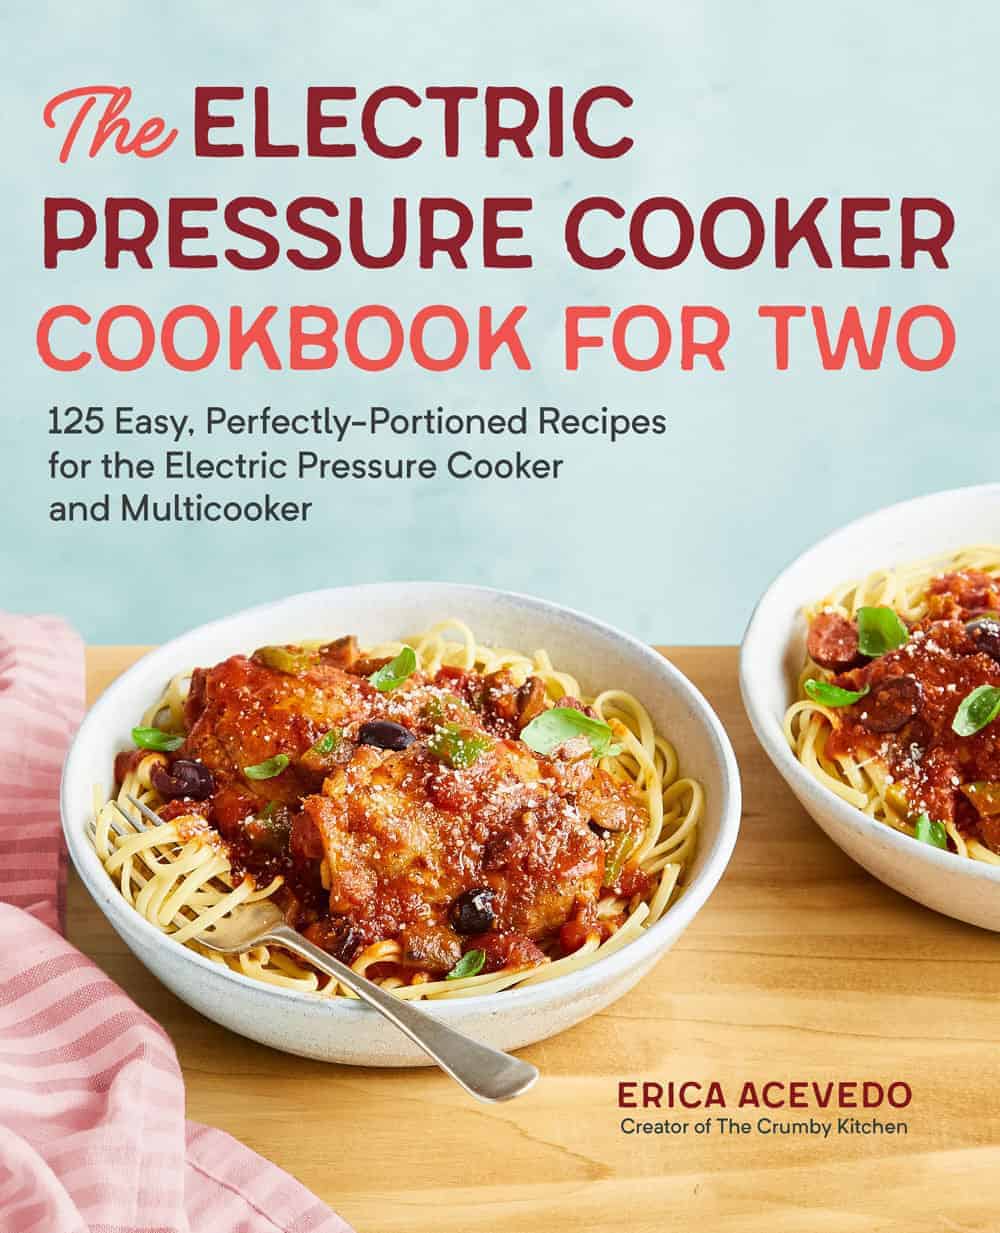 The Electric Pressure Cooker Cookbook for Two